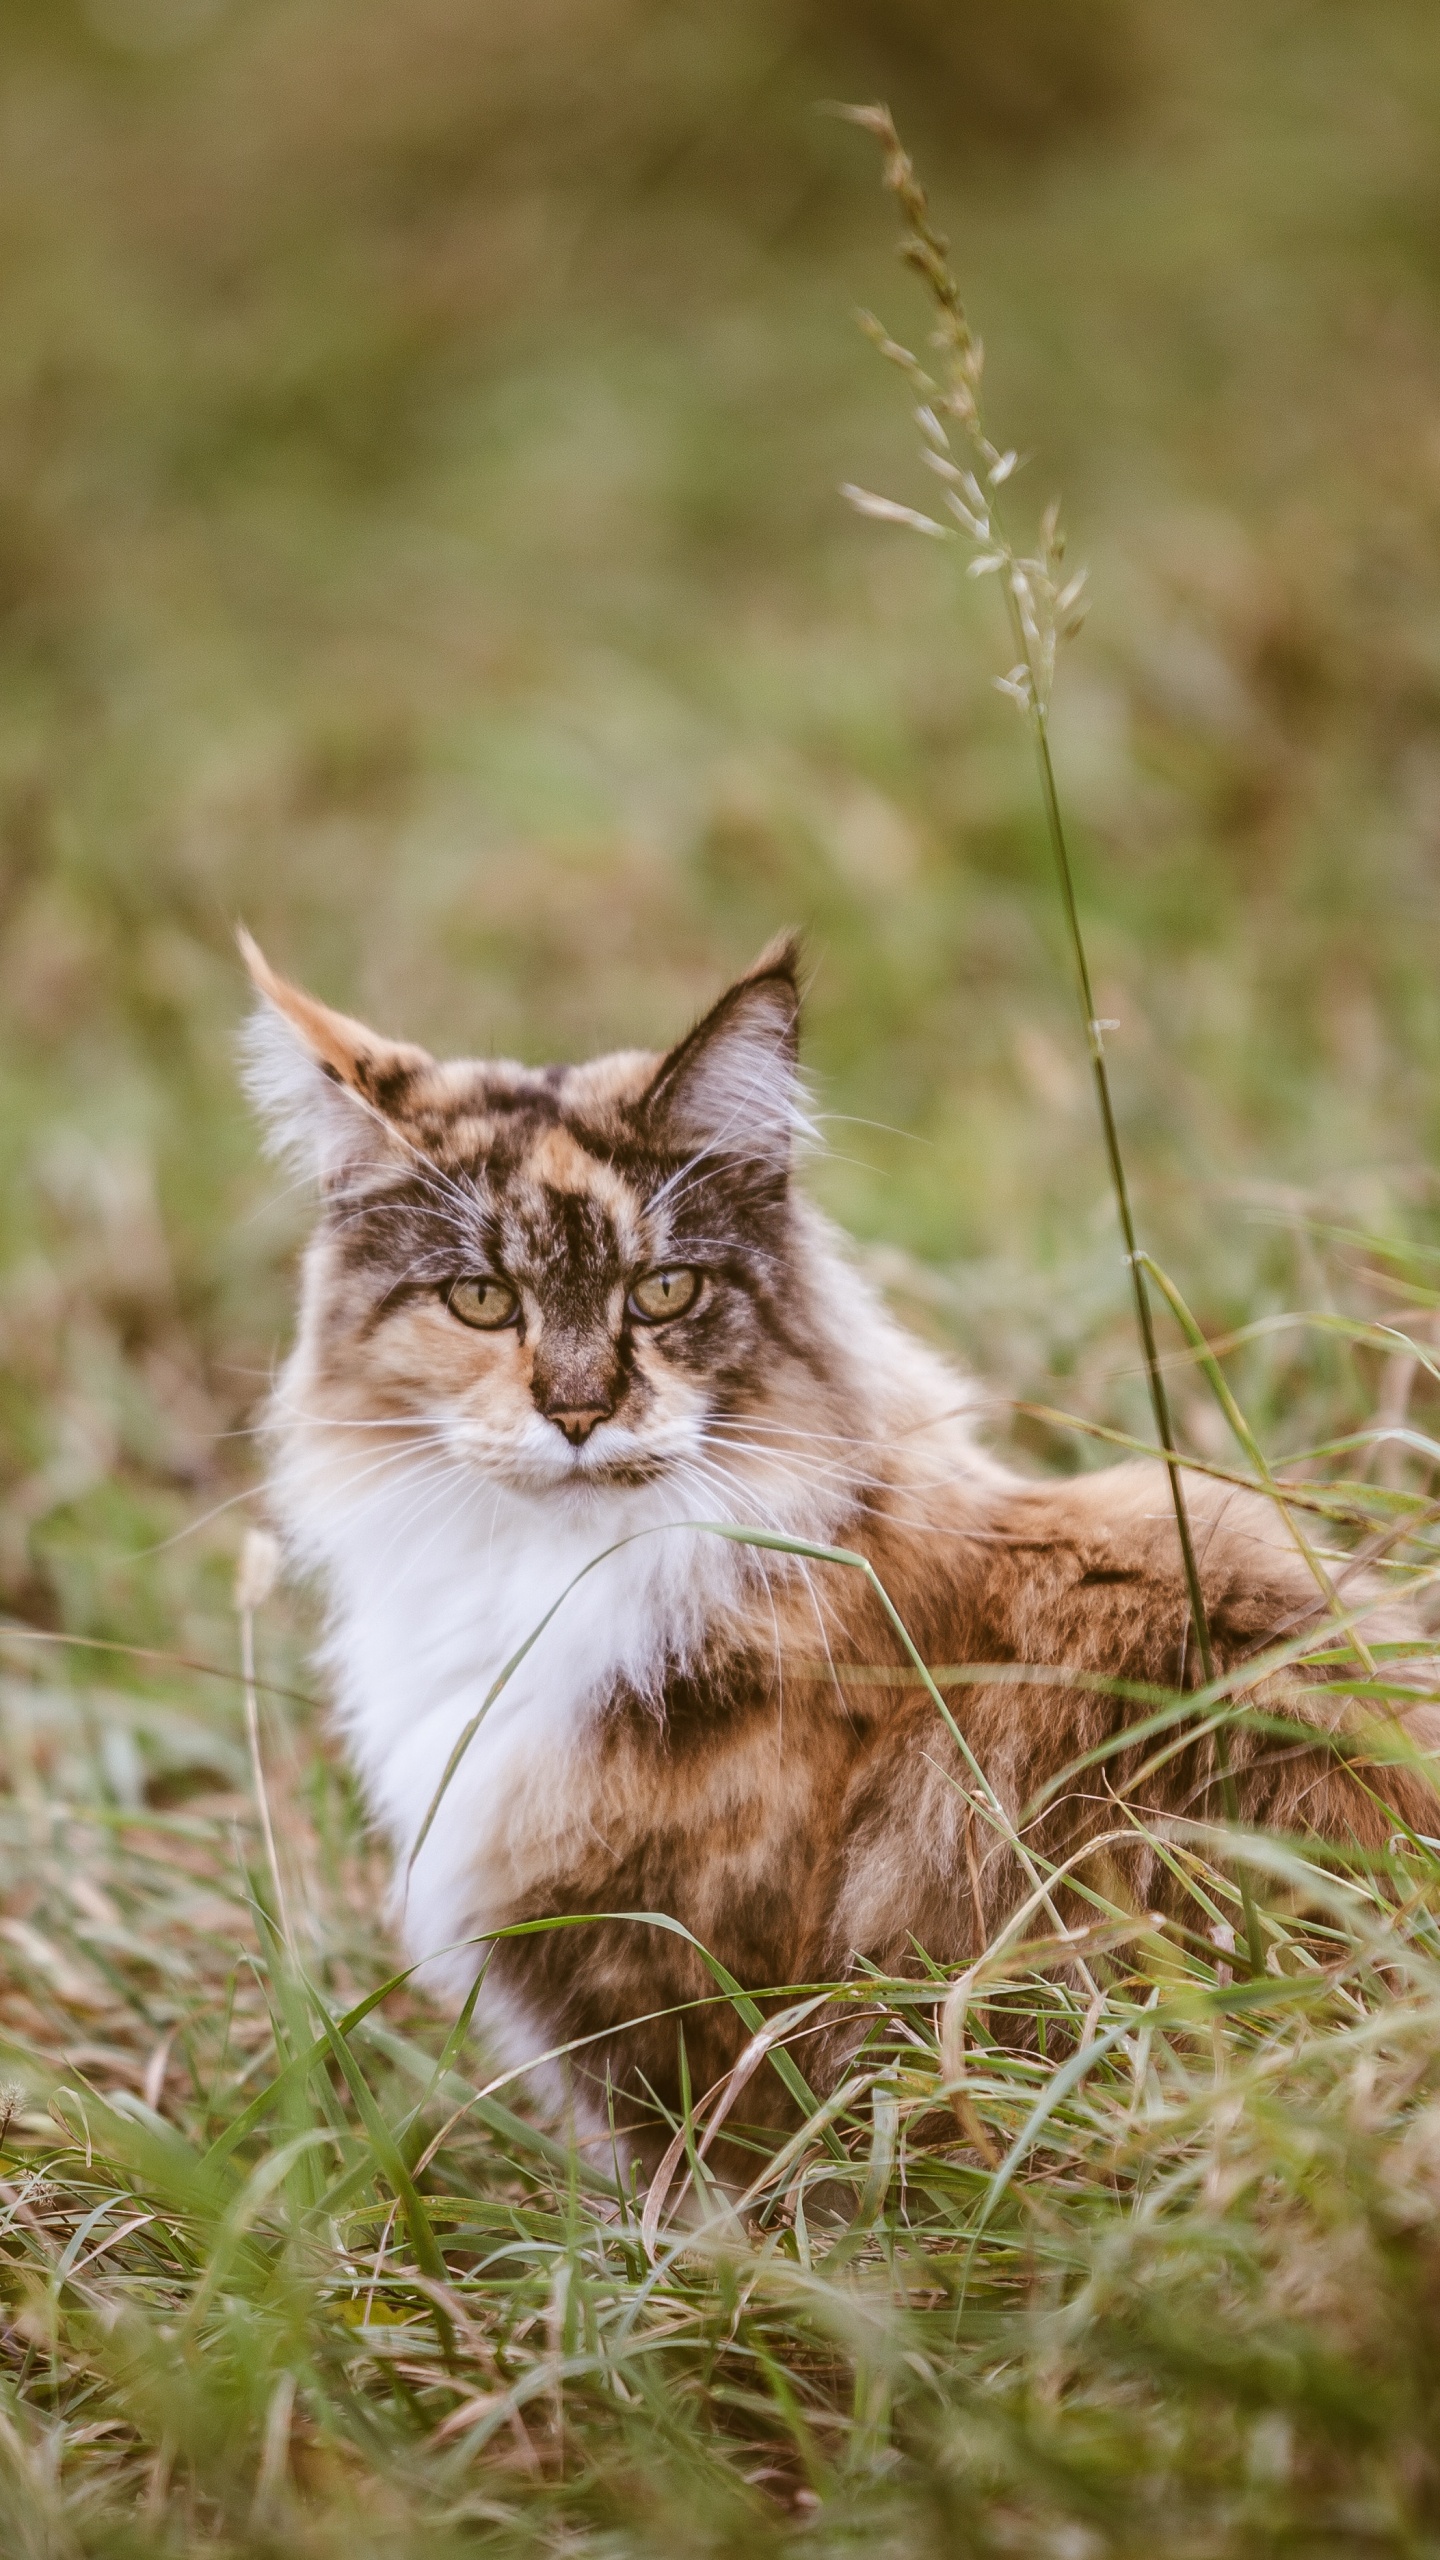 Brown and White Cat on Green Grass During Daytime. Wallpaper in 1440x2560 Resolution